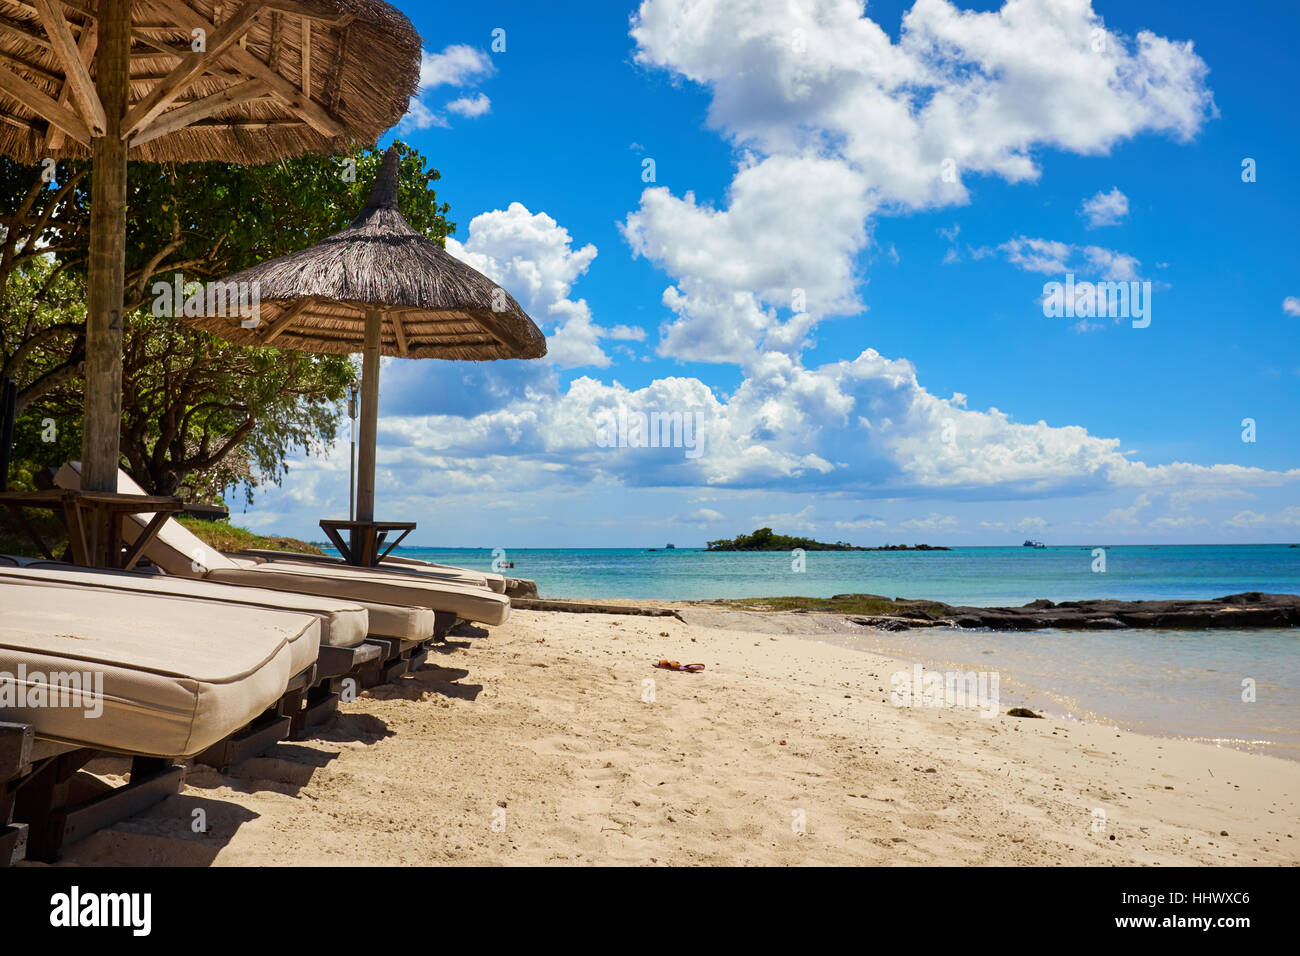 White sand beach with lounge chairs and umbrellas in Mauritius I Stock Photo